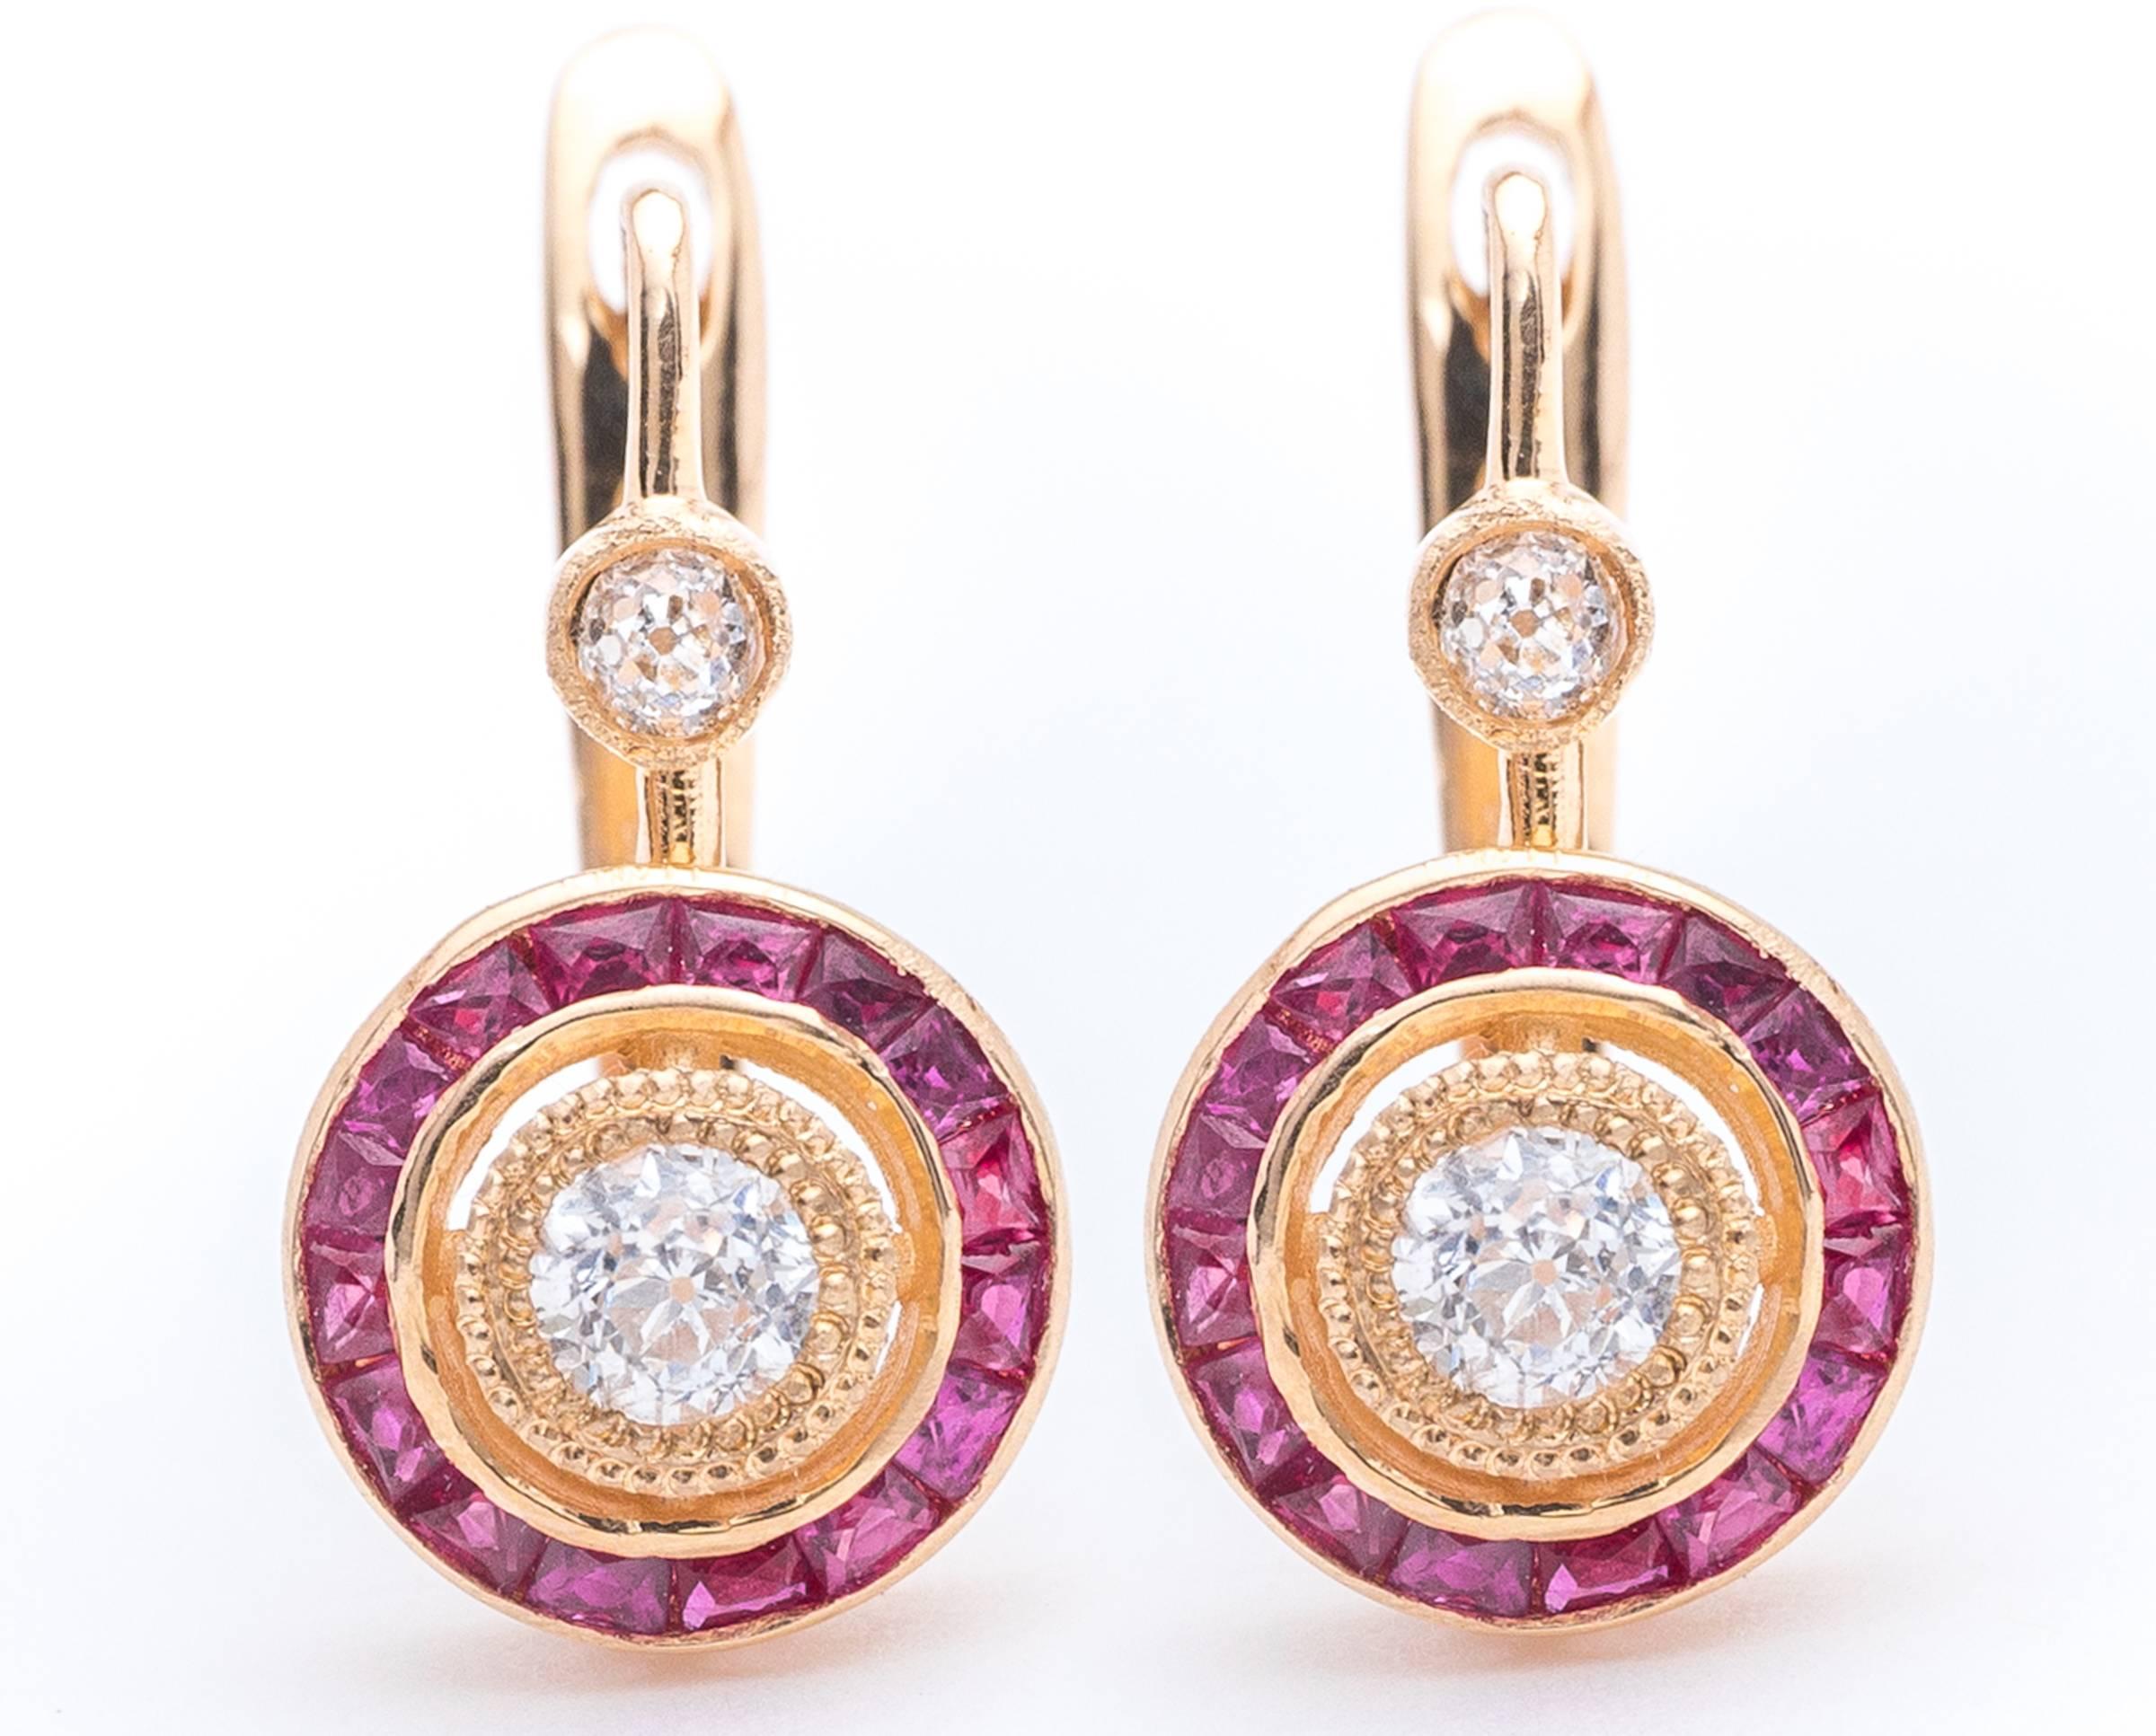 A pair of beautiful target style diamond and ruby earrings in 14 karat yellow gold. Centered by a pair of old European cut diamonds these diamonds feature halos of French cut vivid red rubies surrounding the sparkling diamonds.

Grading as beautiful